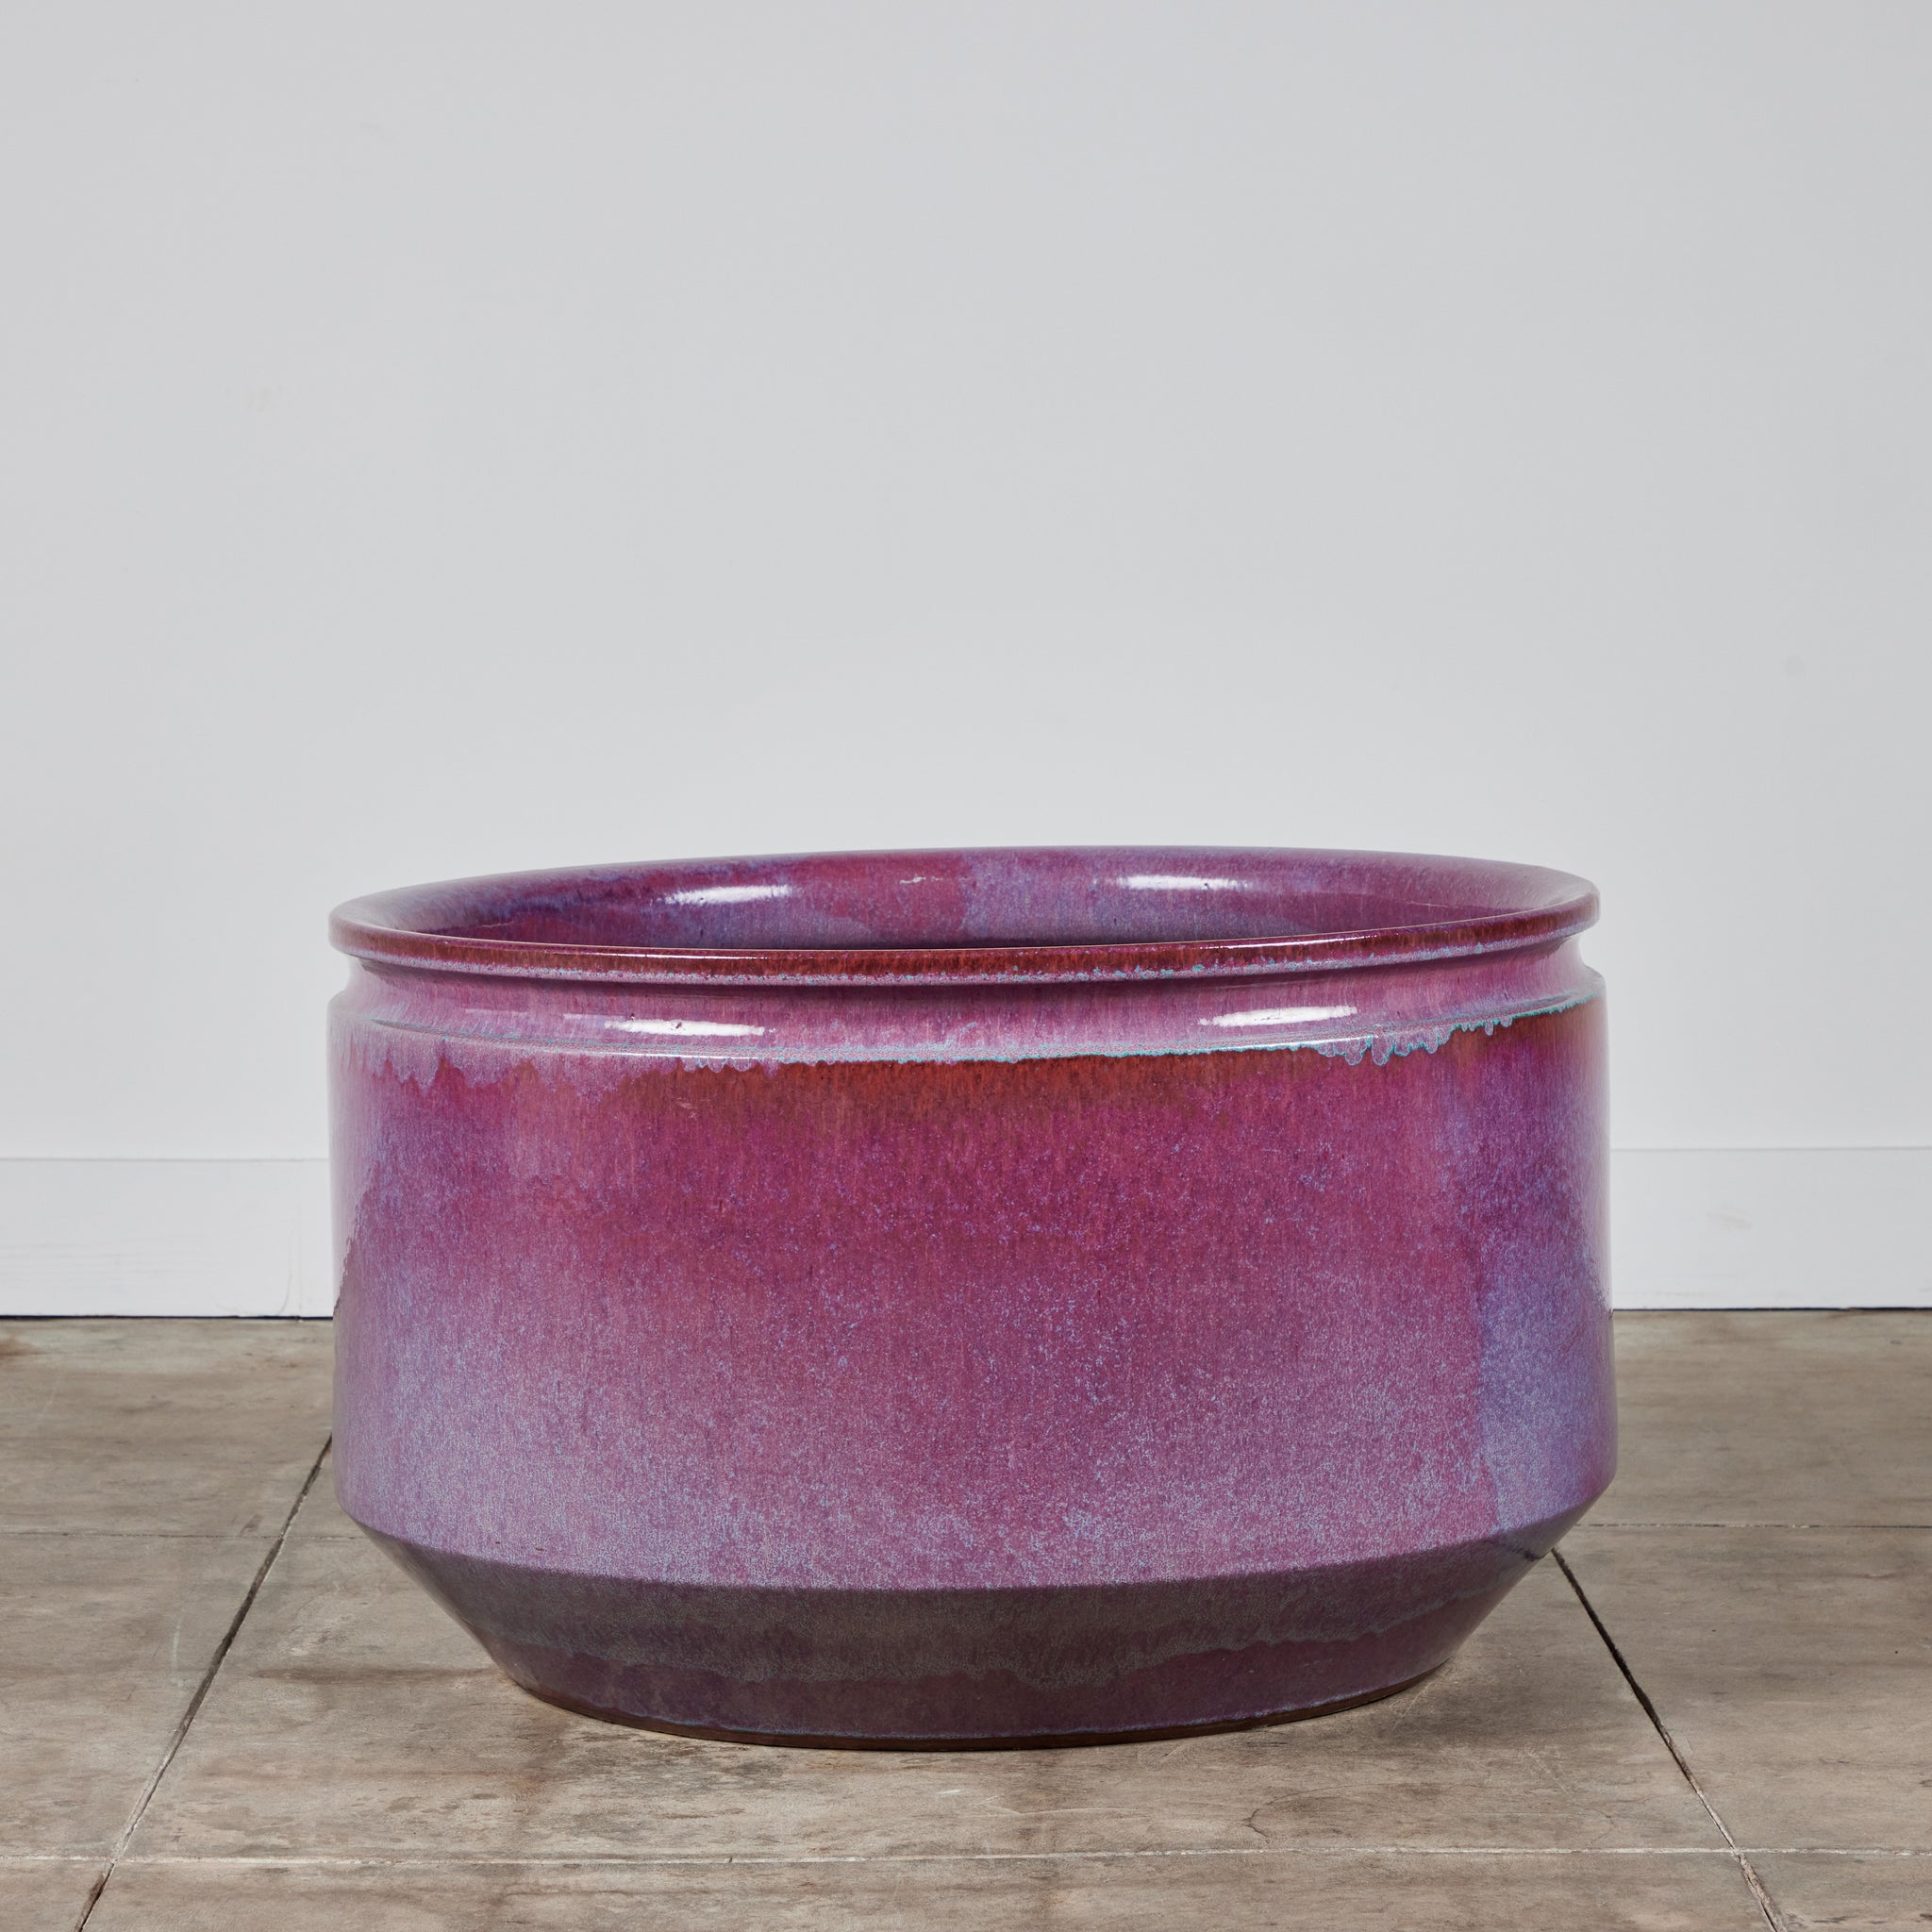 David Cressey and Robert Maxwell Large Ombre Glazed Planter for Earthgender